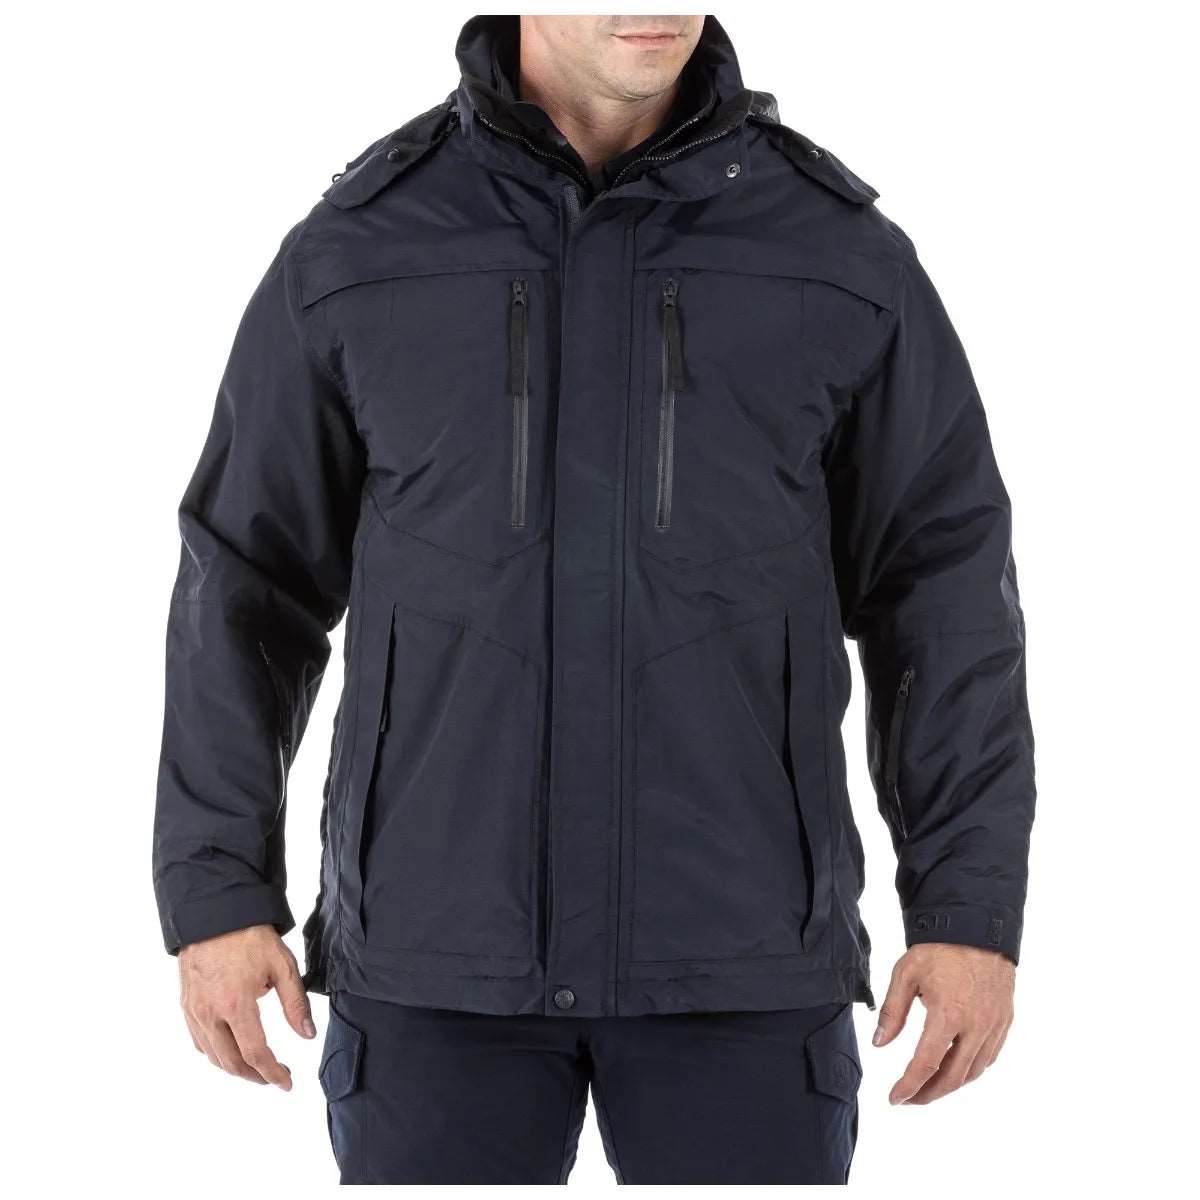 Outerwear - 5.11 Tactical Bristol Parka Systems Jacket